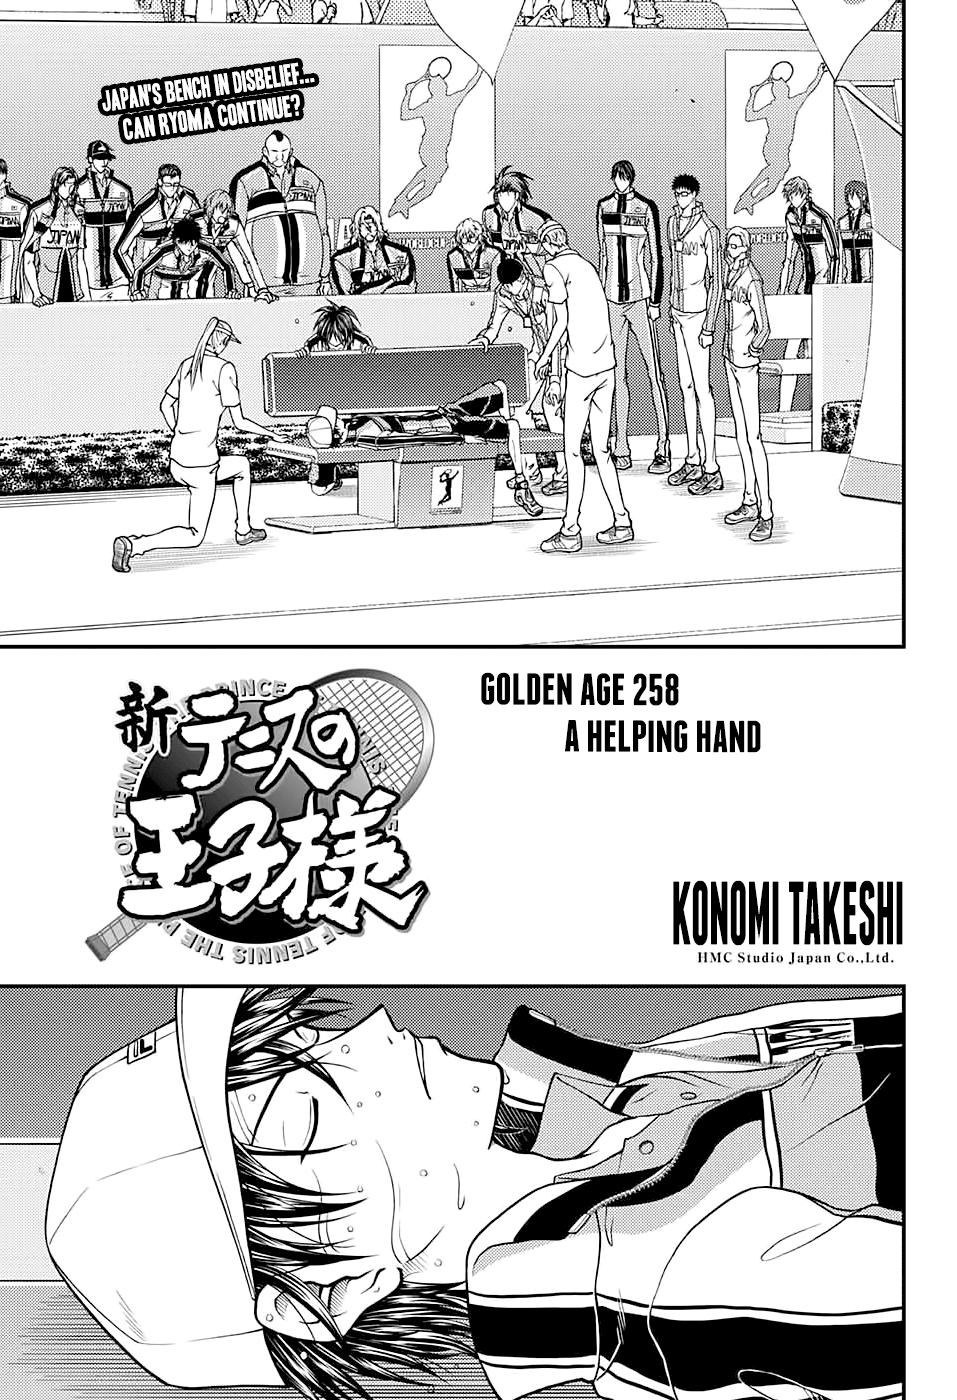 New Prince Of Tennis - Page 1